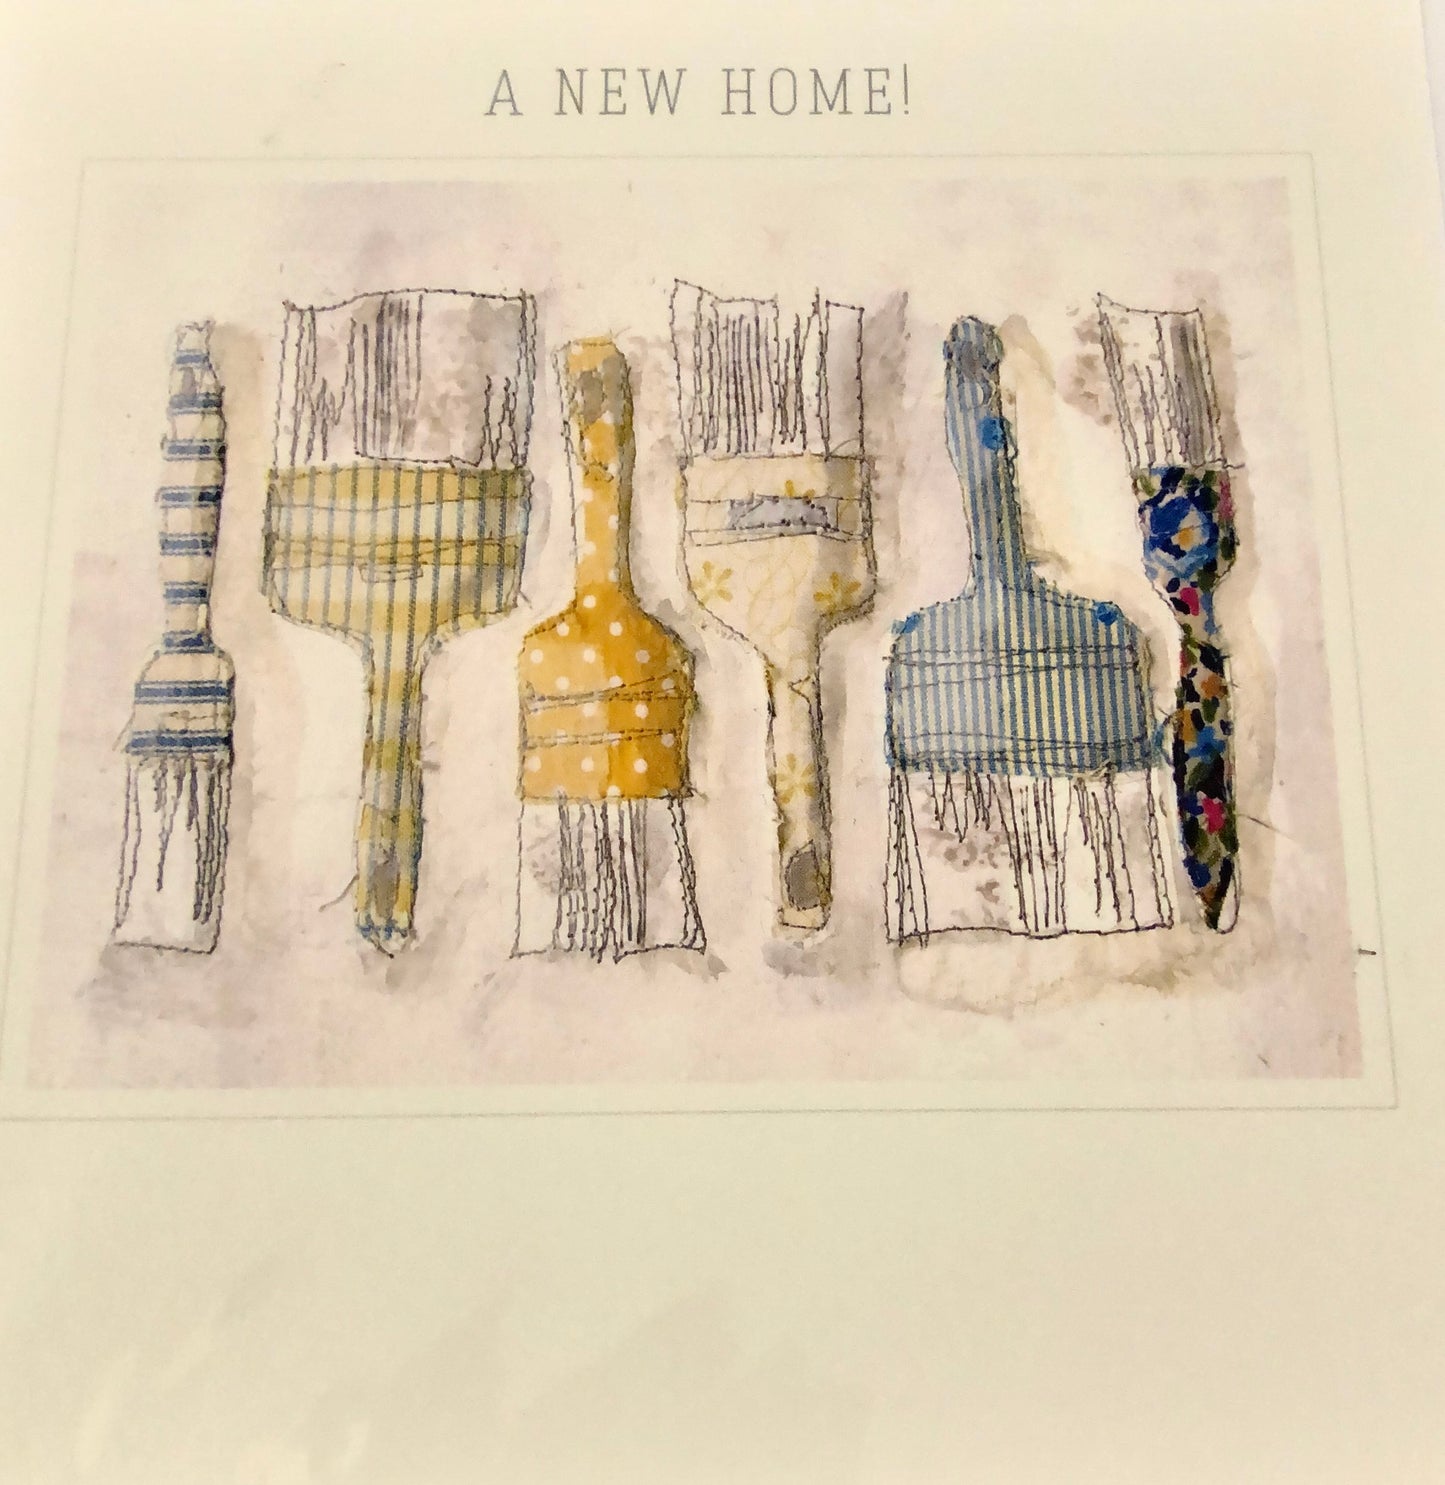 A New Home (Paintbrushes)